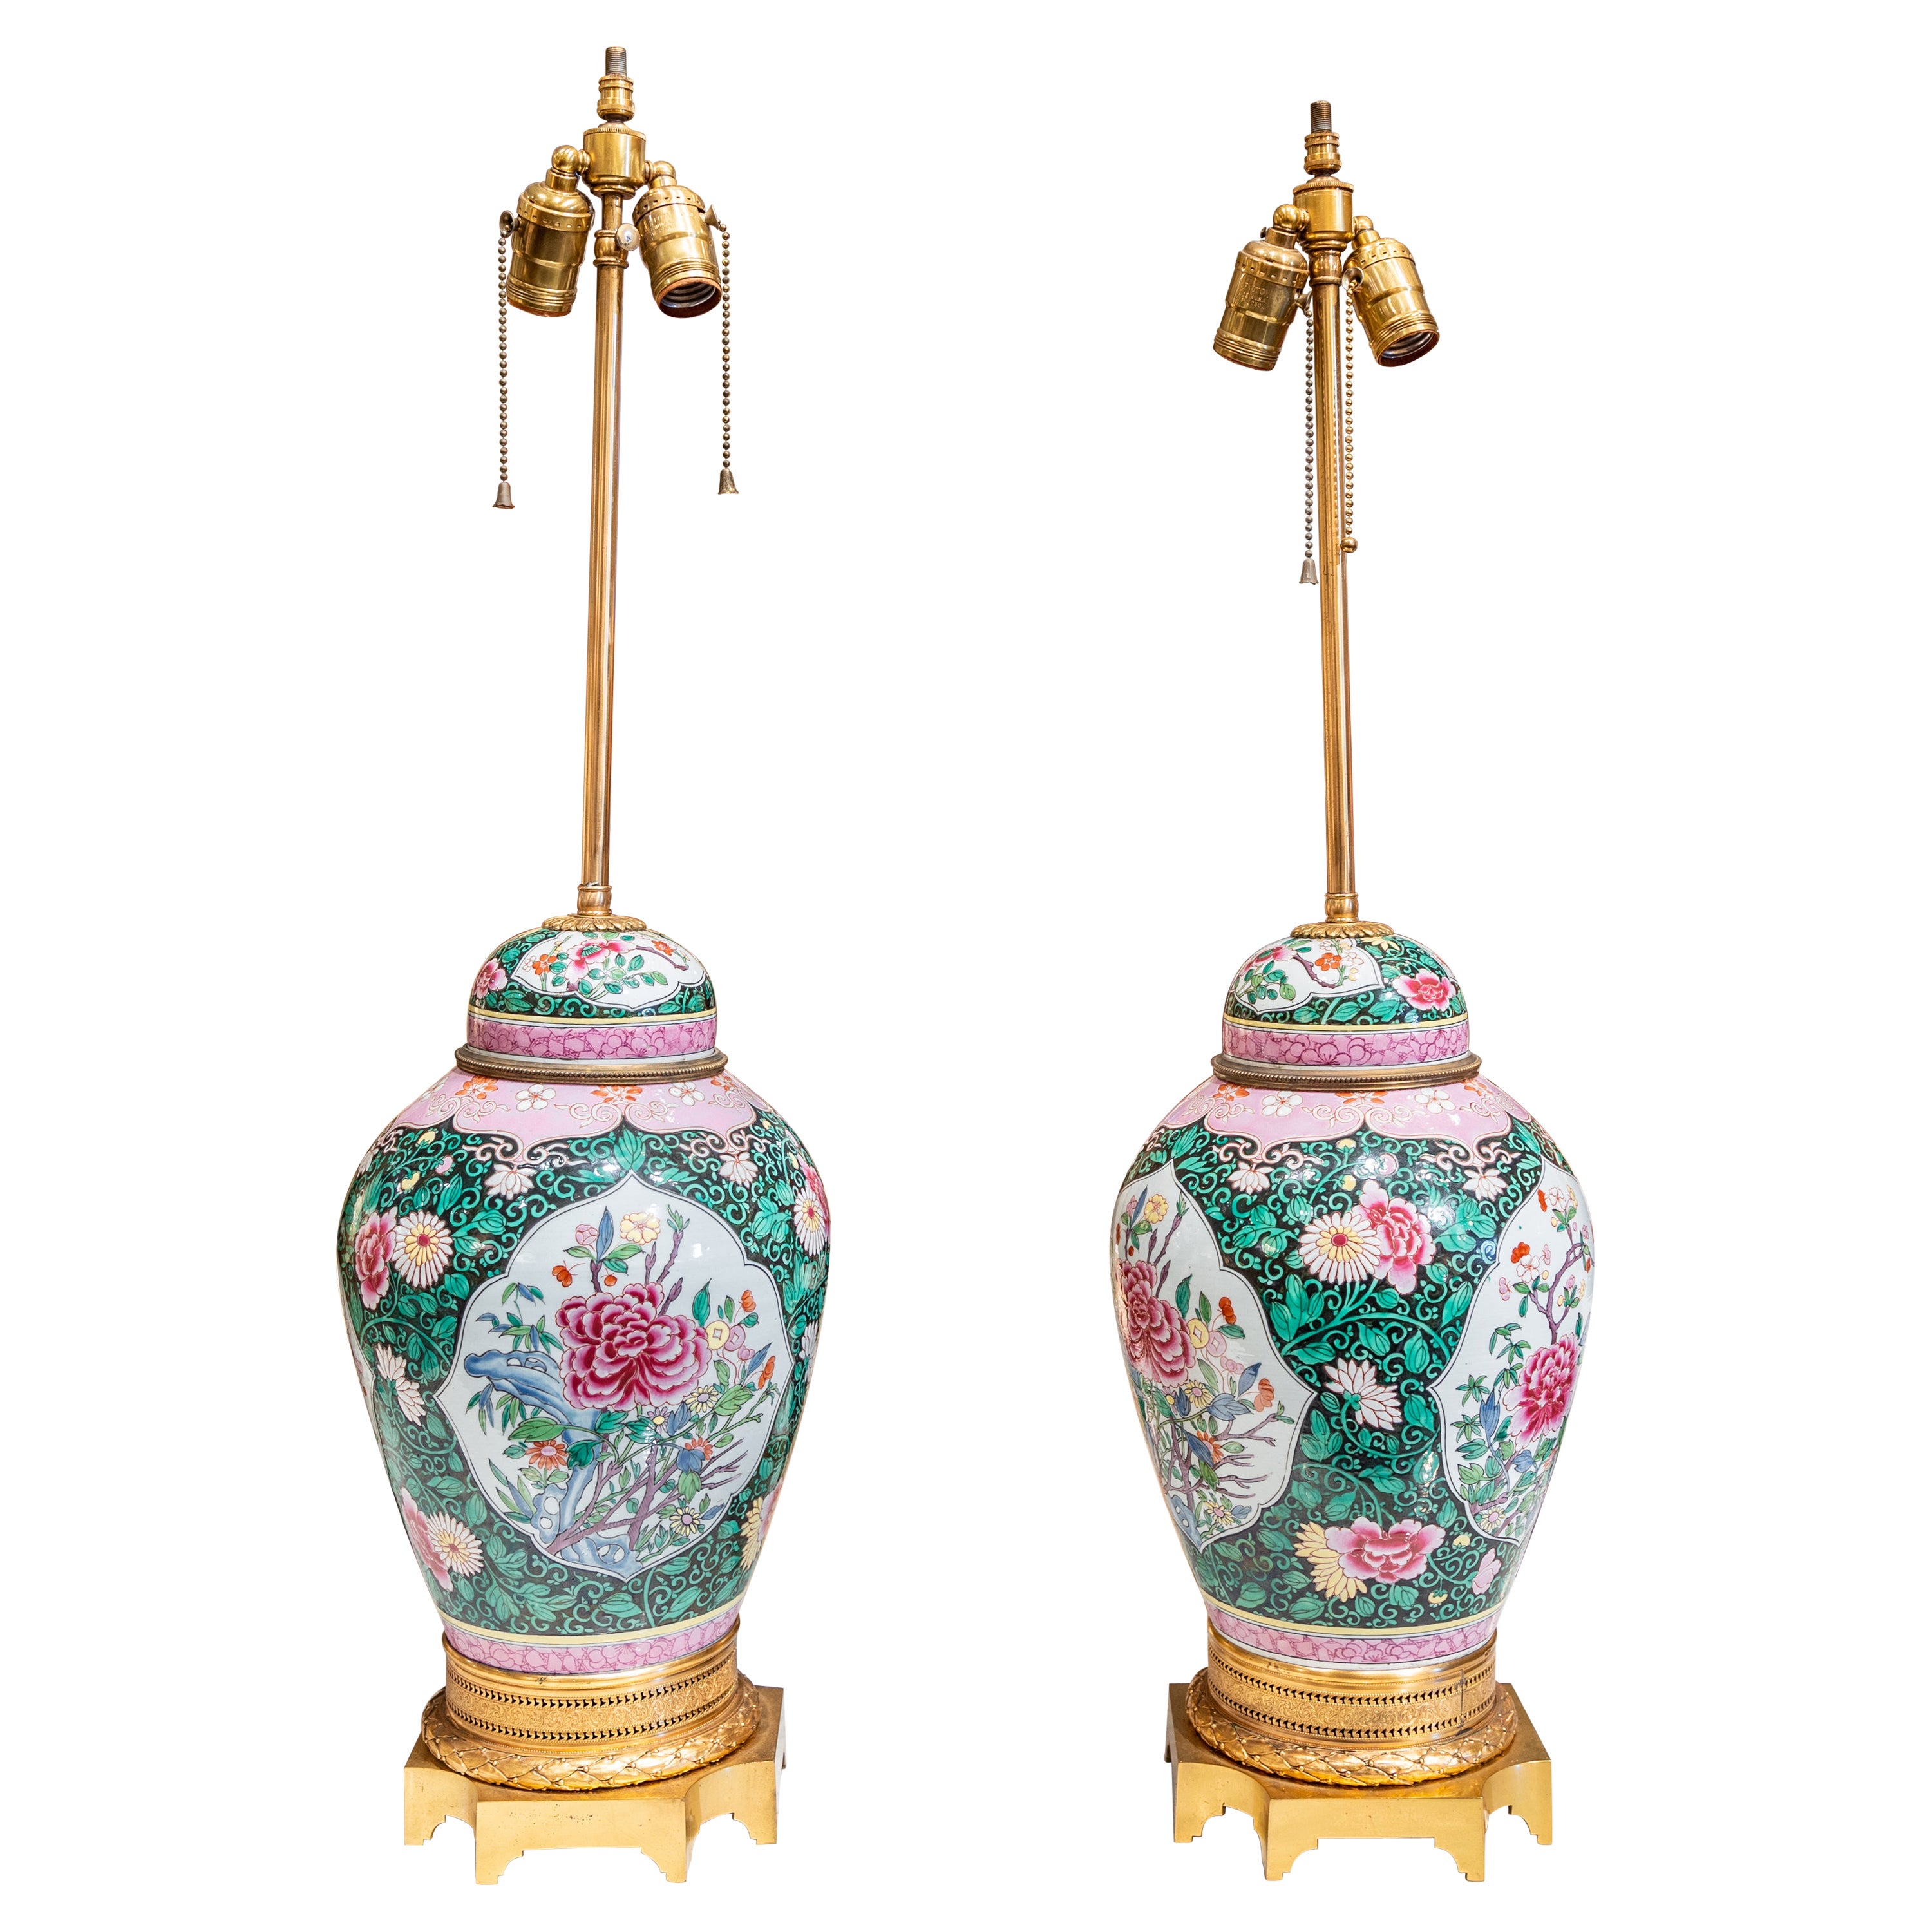 Fine Pair of 19th C French Famille Verte Porcelain and Bronze Dore Urn Lamps